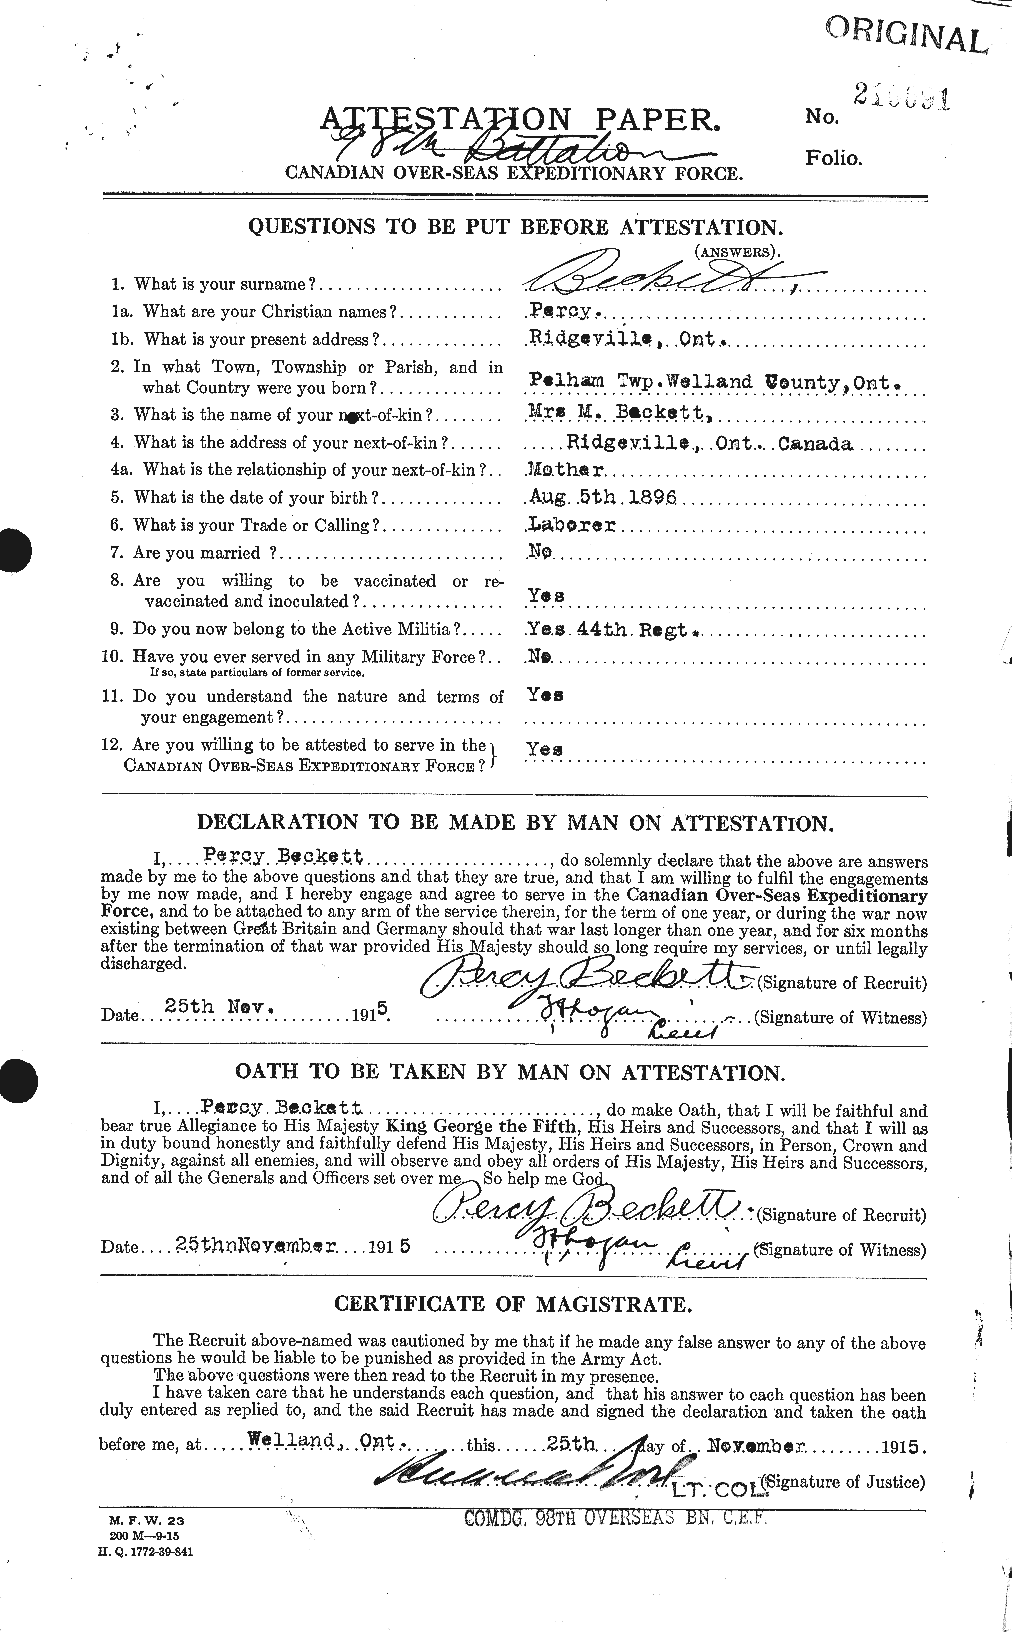 Personnel Records of the First World War - CEF 229960a